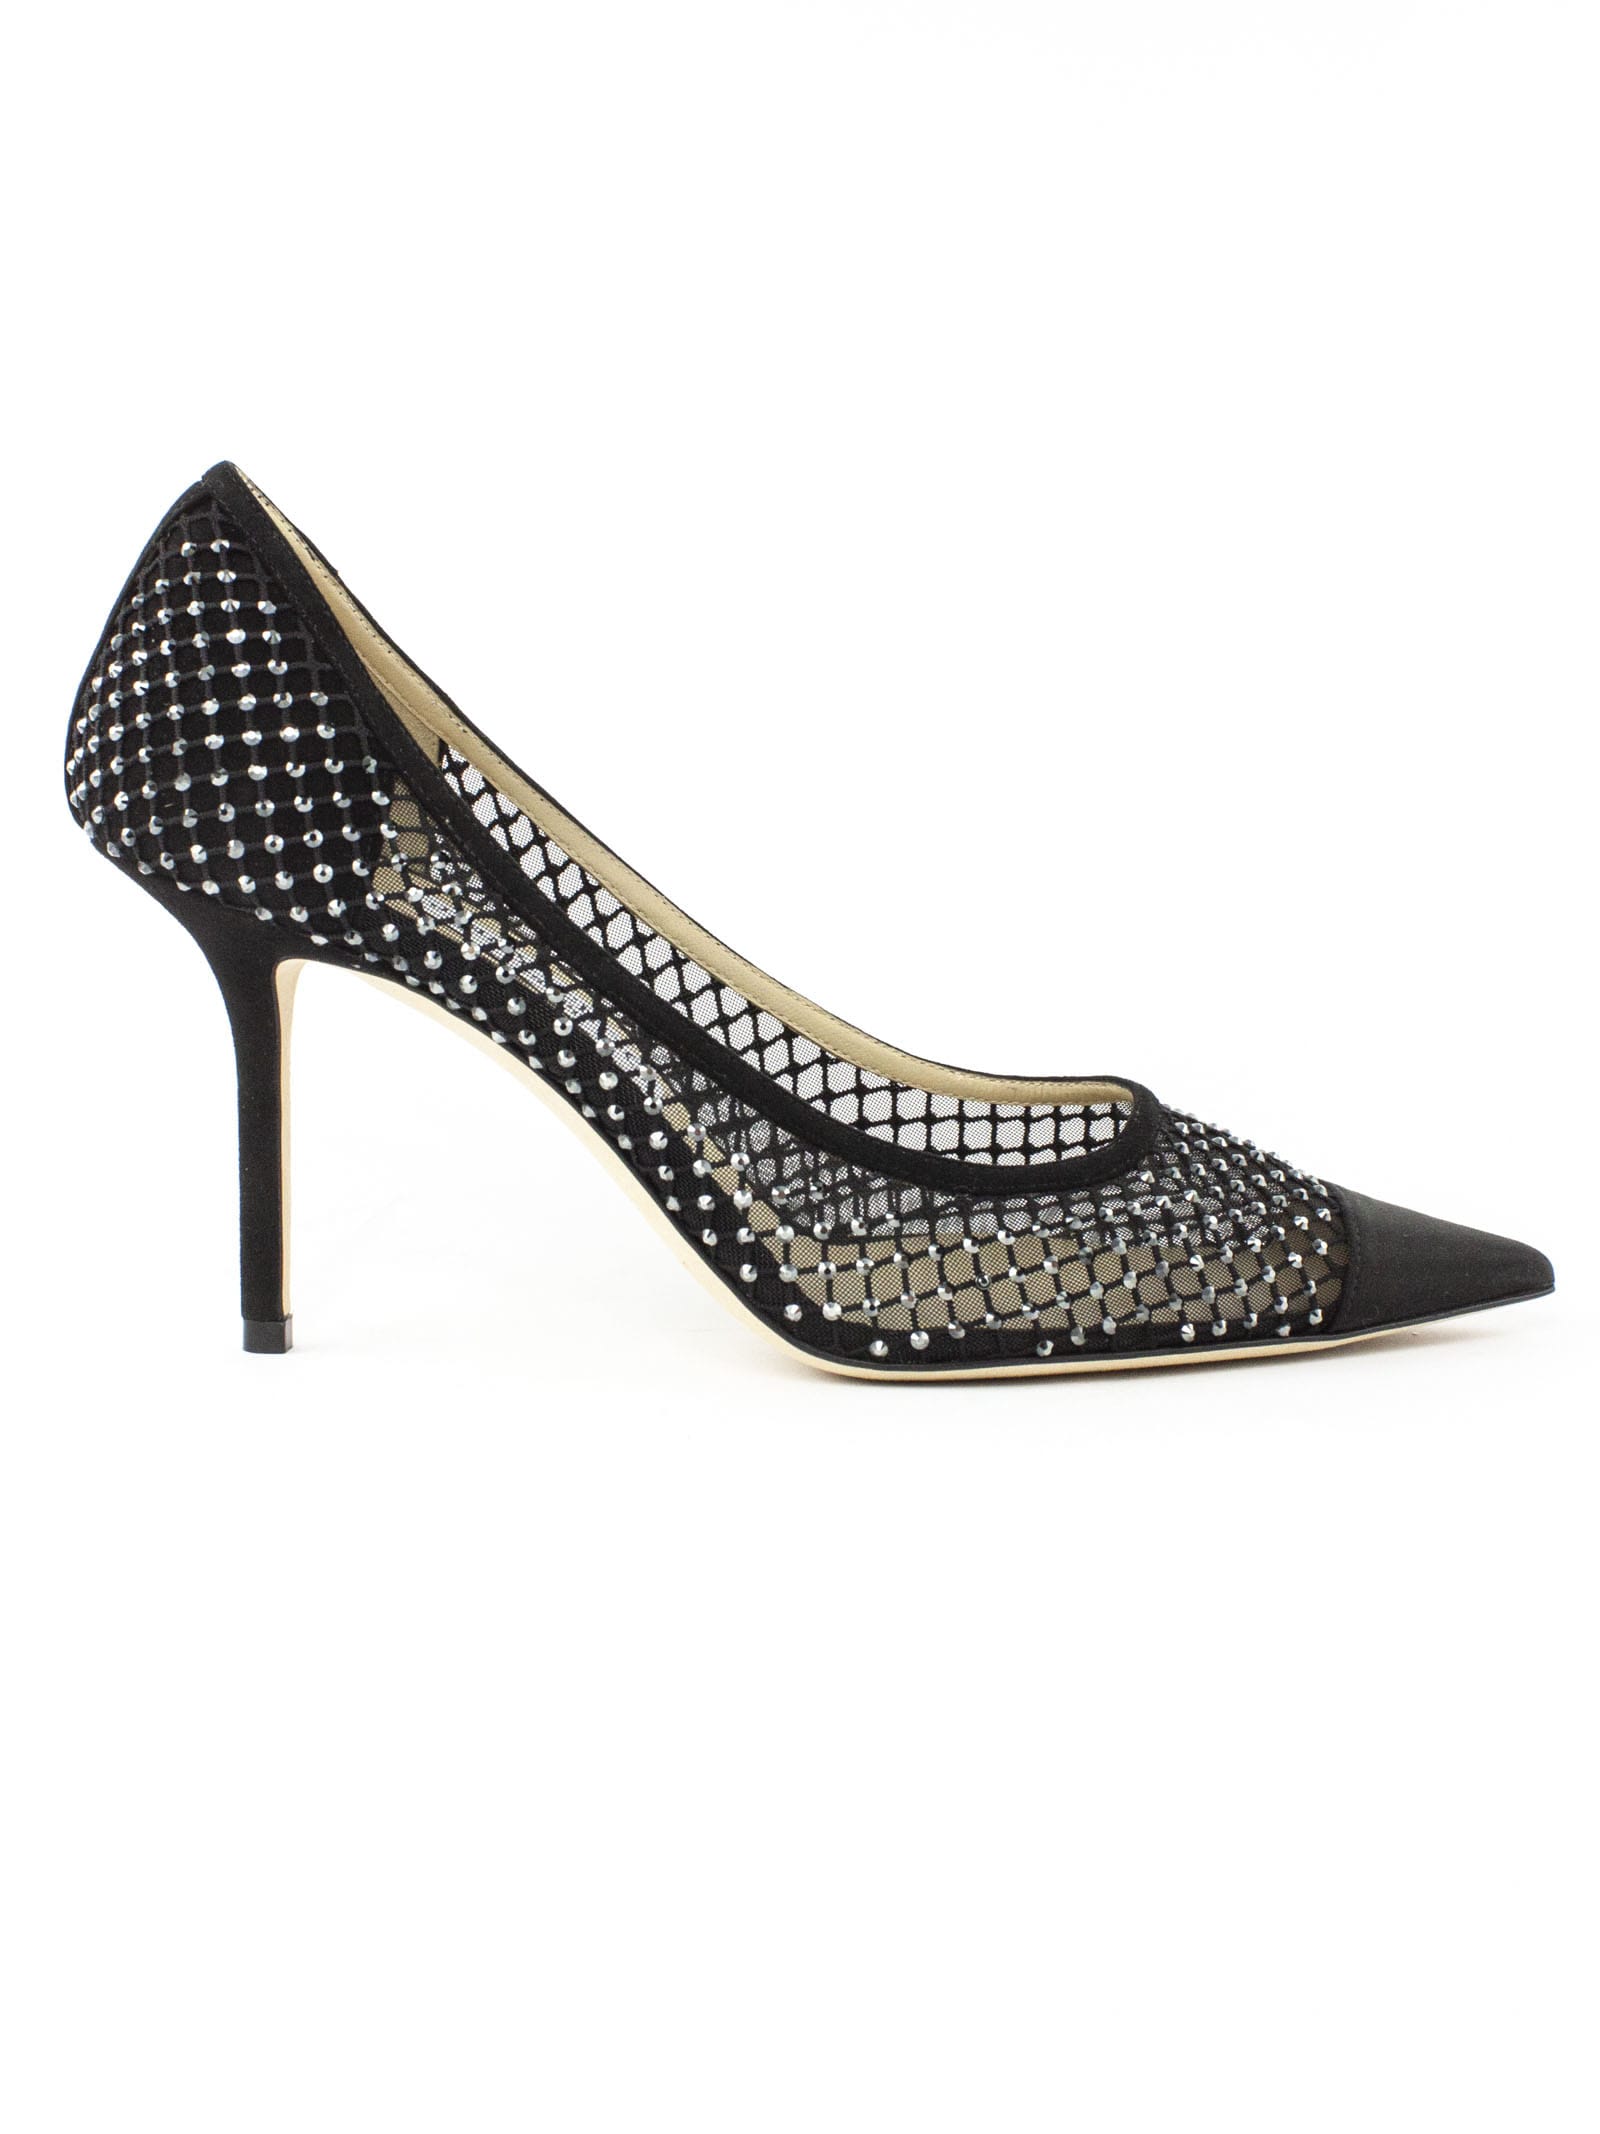 Jimmy Choo Black Satin And Suede Pumps | Coshio Online Shop